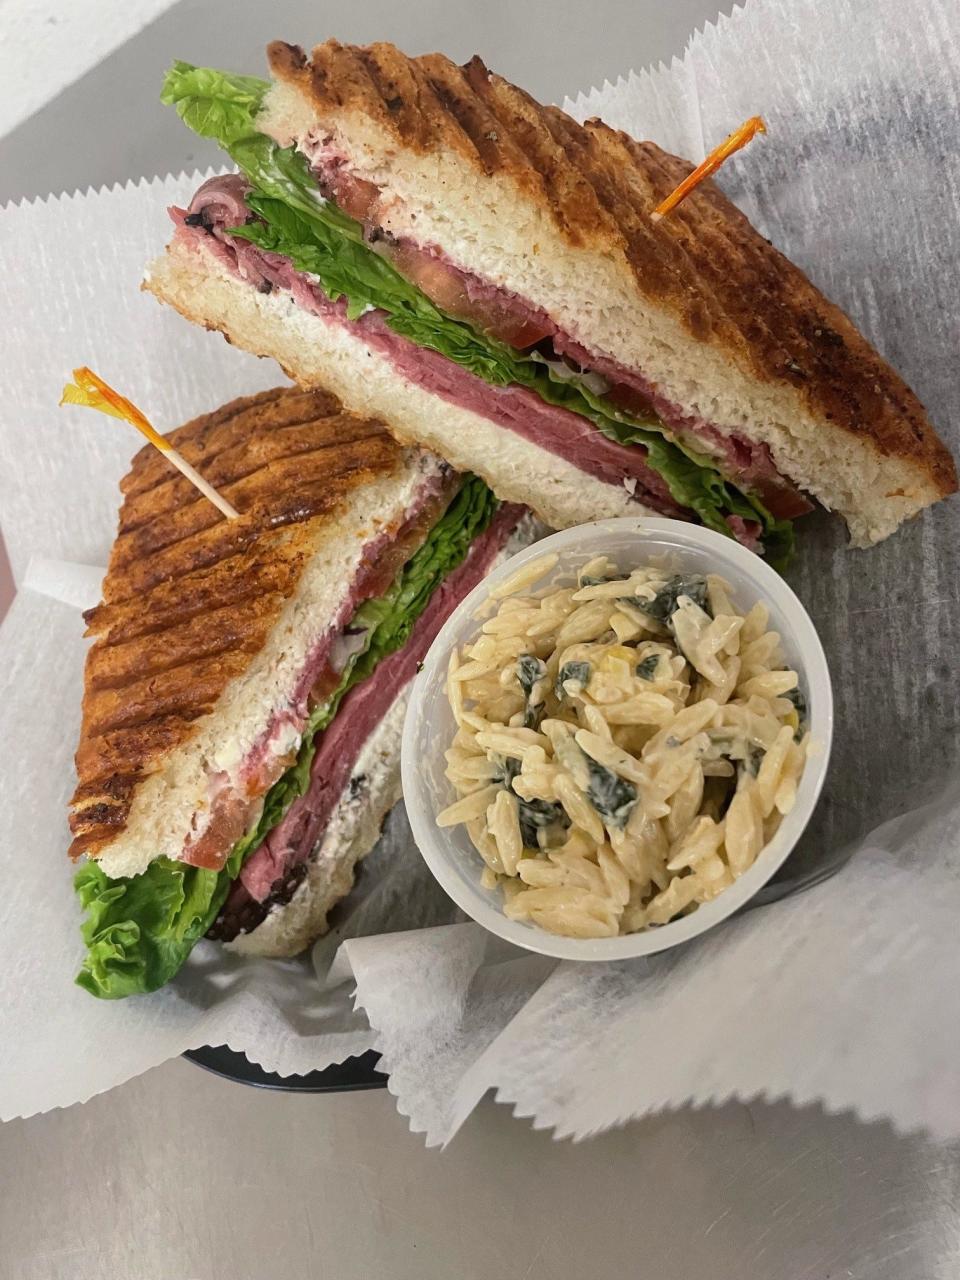 The Chef and The Baker offer a Beef and Blue sandwich, which includes a blue cheese horseradish sauce, lettuce, onions, tomatoes and roast beef.